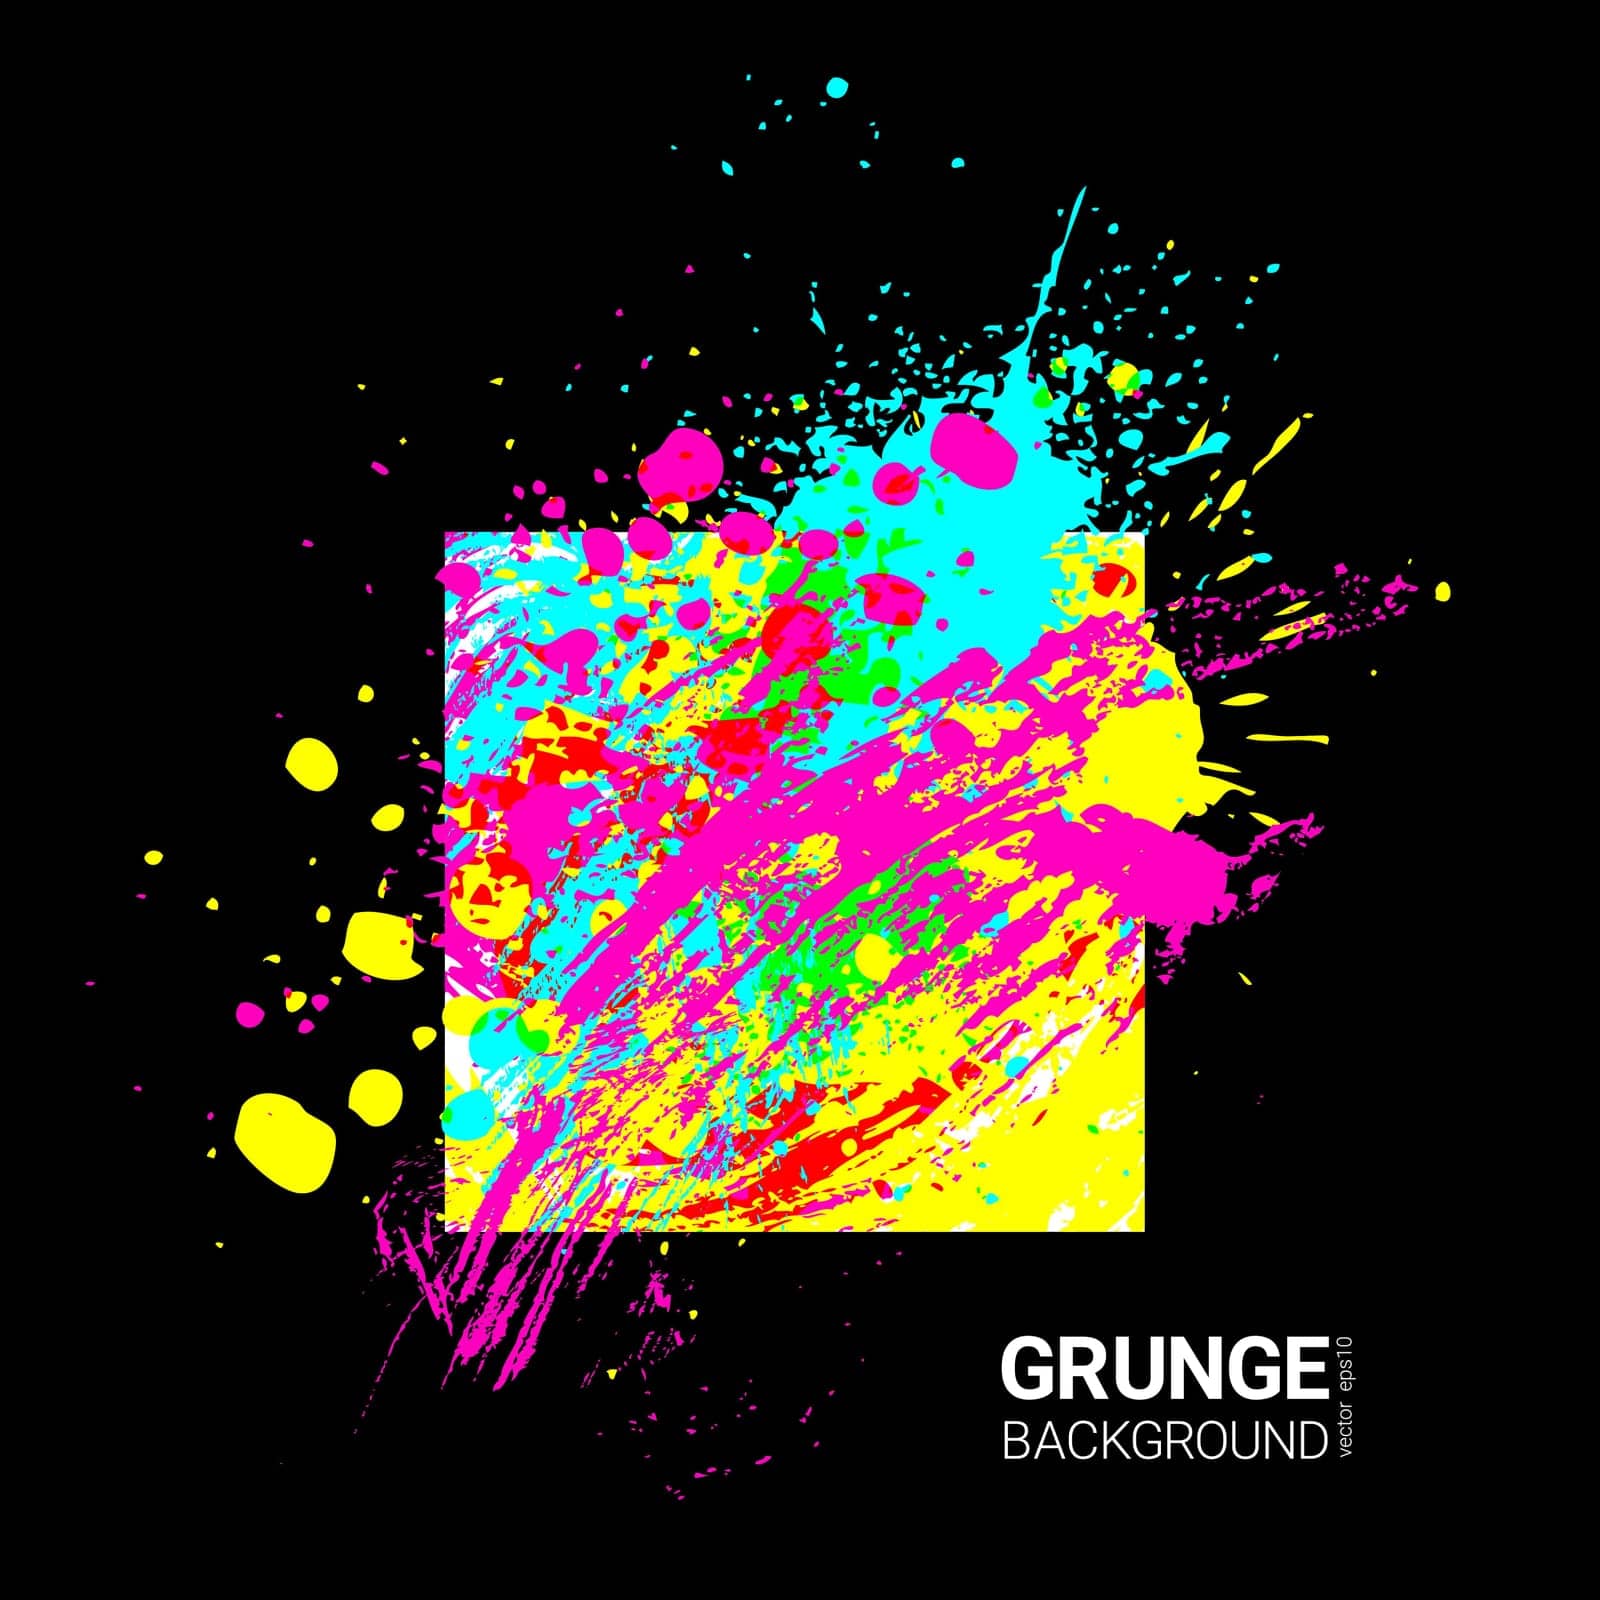 Abstract art paint ink splash, colorful blobs, drops and brush strokes on black background. Vector grunge illustration, design template for creative by Fyuriy